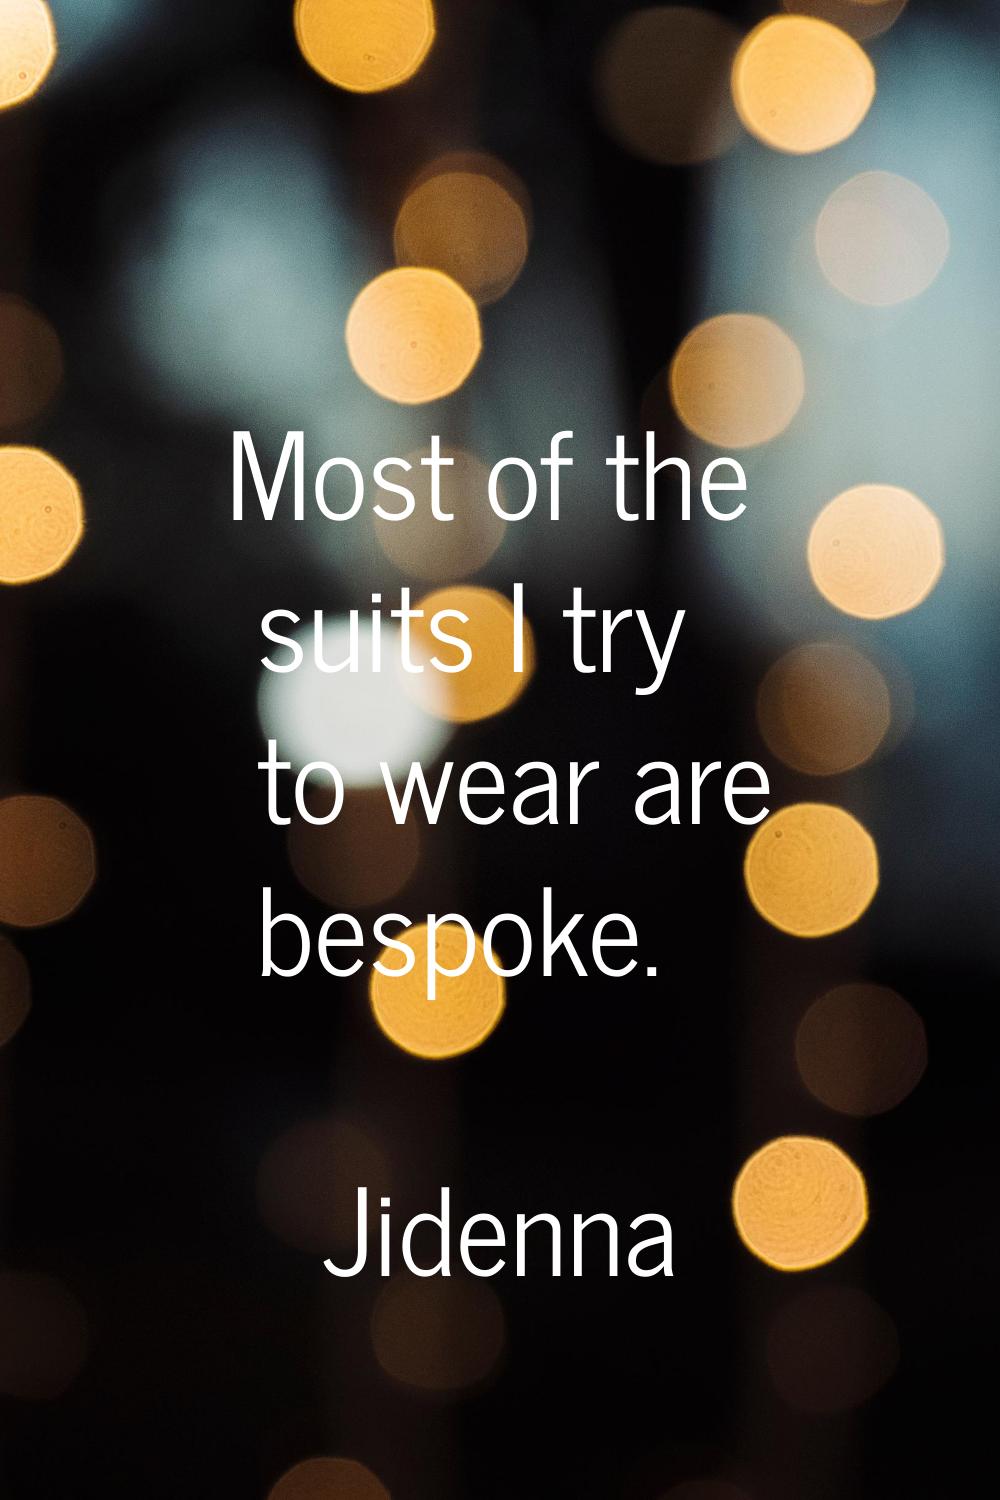 Most of the suits I try to wear are bespoke.